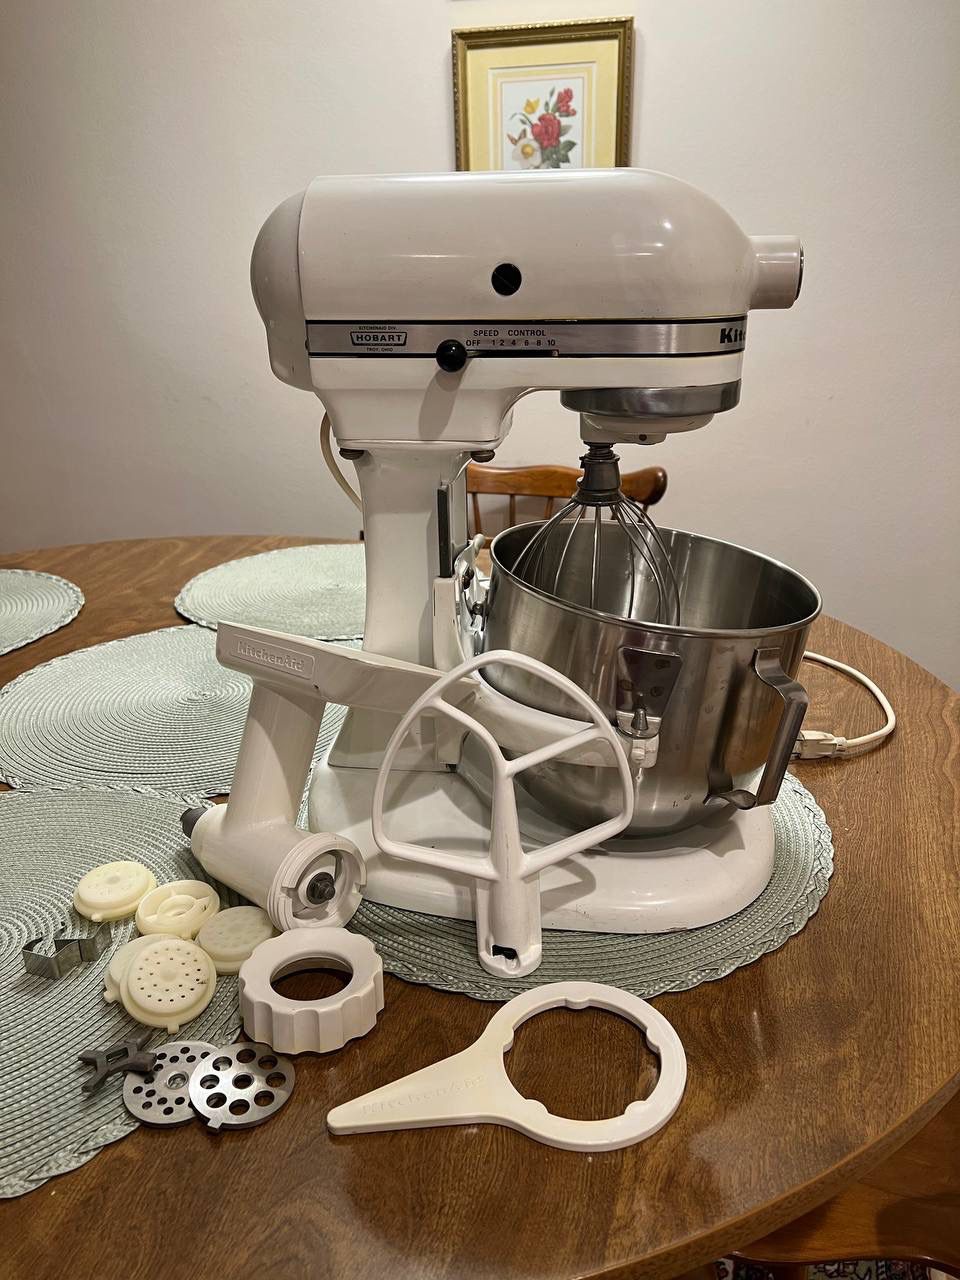 KitchenAid heavy-duty lift stand Mixer Model K5SS for Sale in